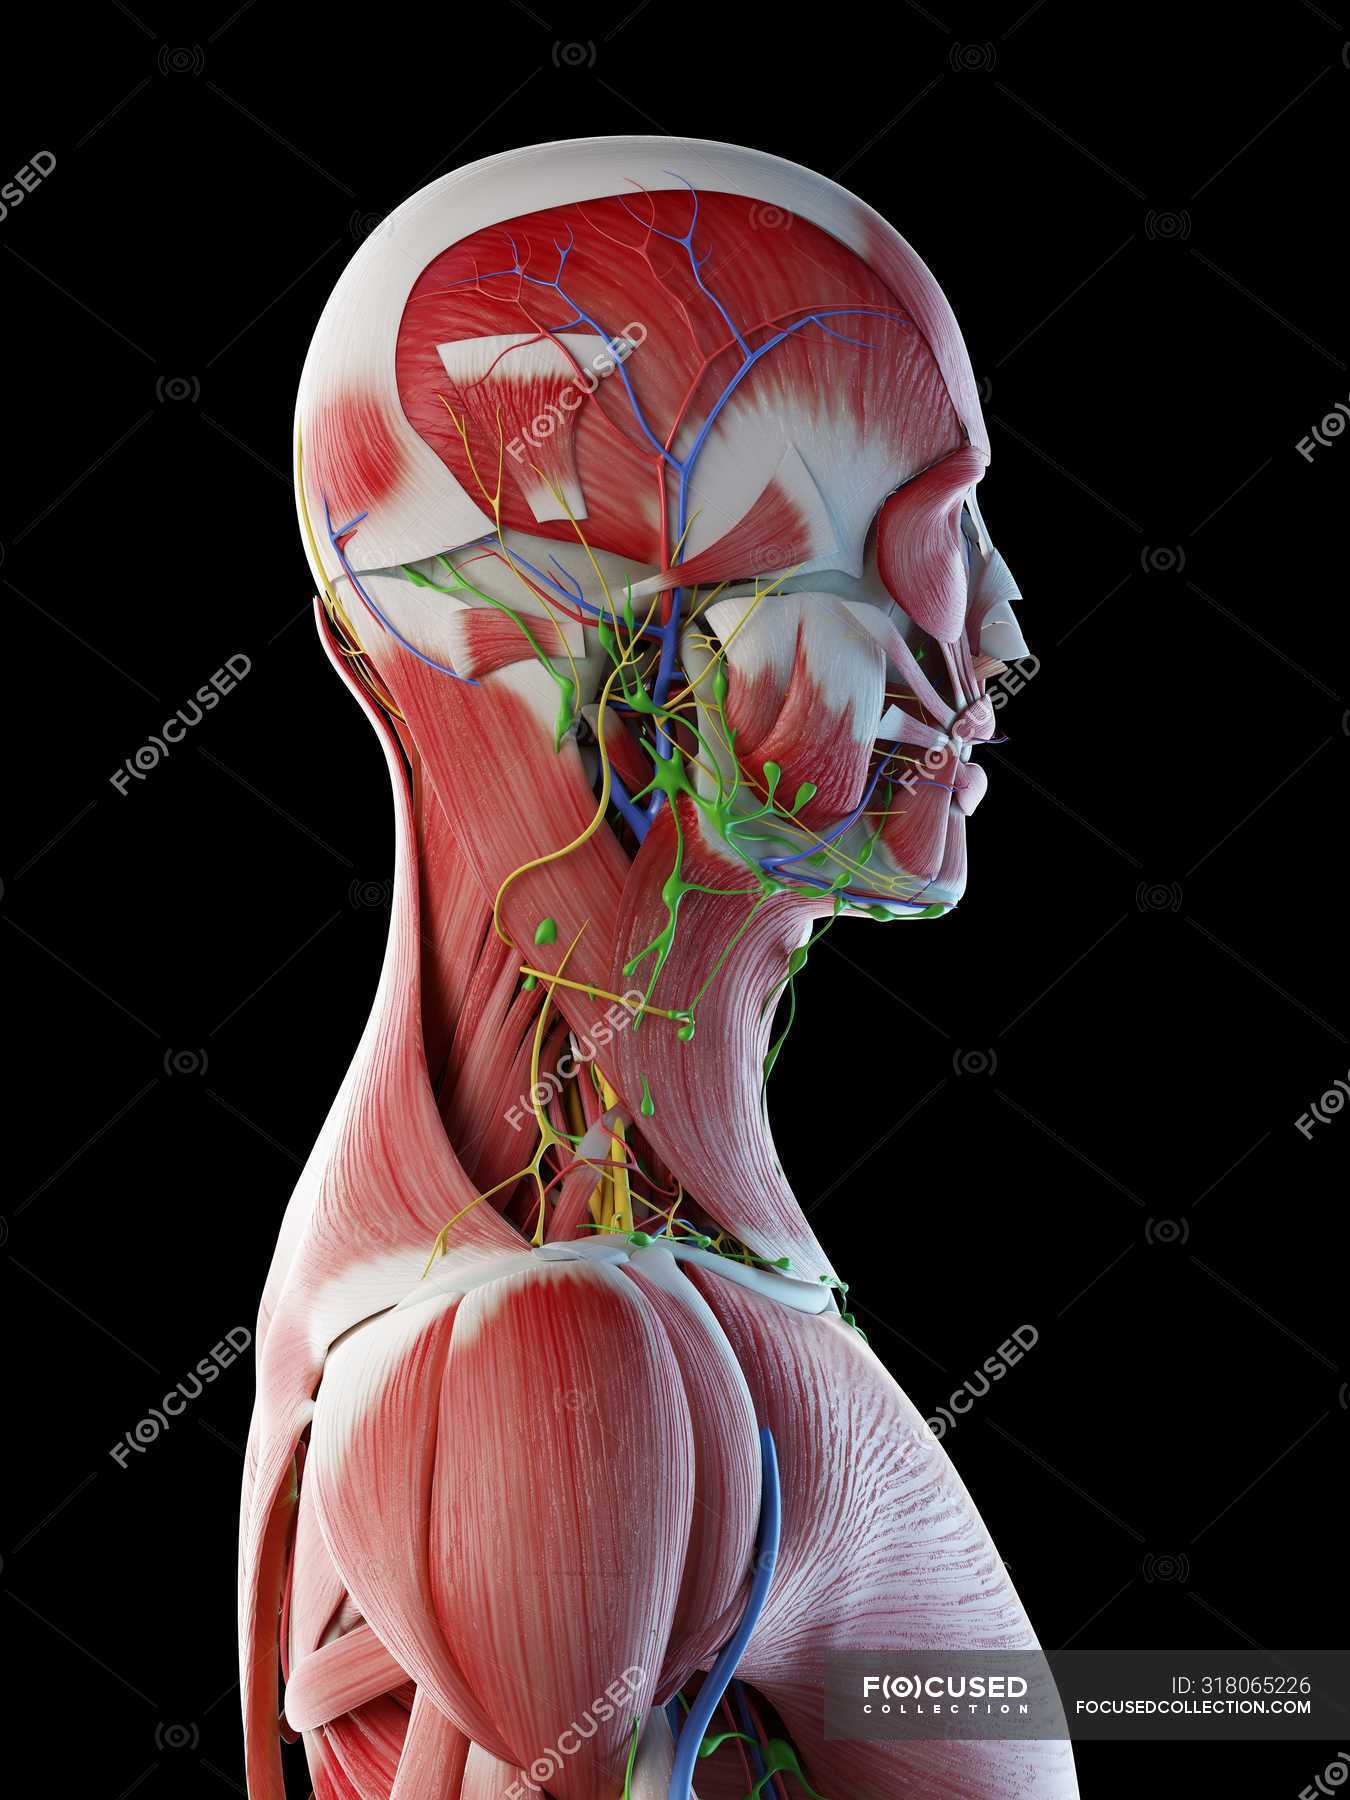 Male Anatomy Of Head Neck And Back With Musculature Computer Illustration Normal Transparent Stock Photo